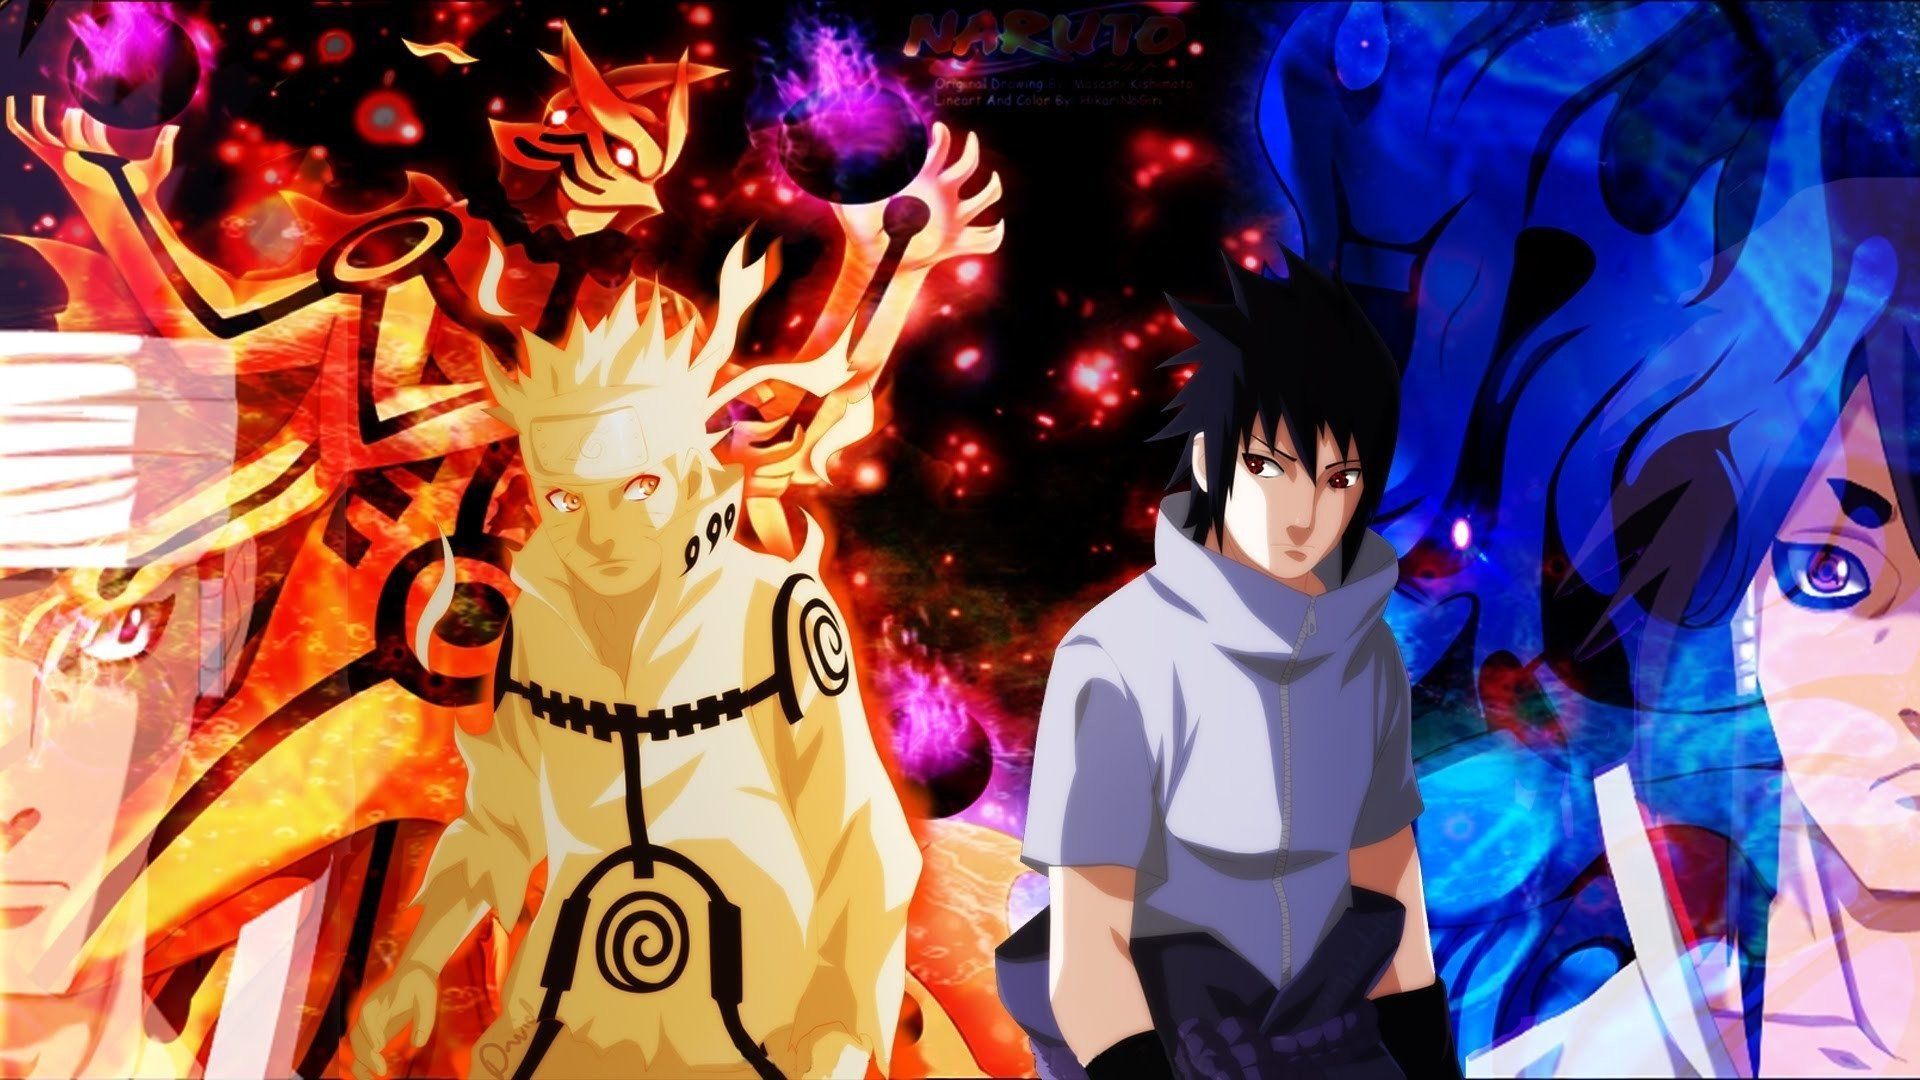 Naruto Sage Of Six Paths Wallpaper Naruto HD Wallpaper Background Image 1920x1080 Id Best 53 Si. Cool anime wallpaper, Naruto wallpaper, Cute pokemon wallpaper